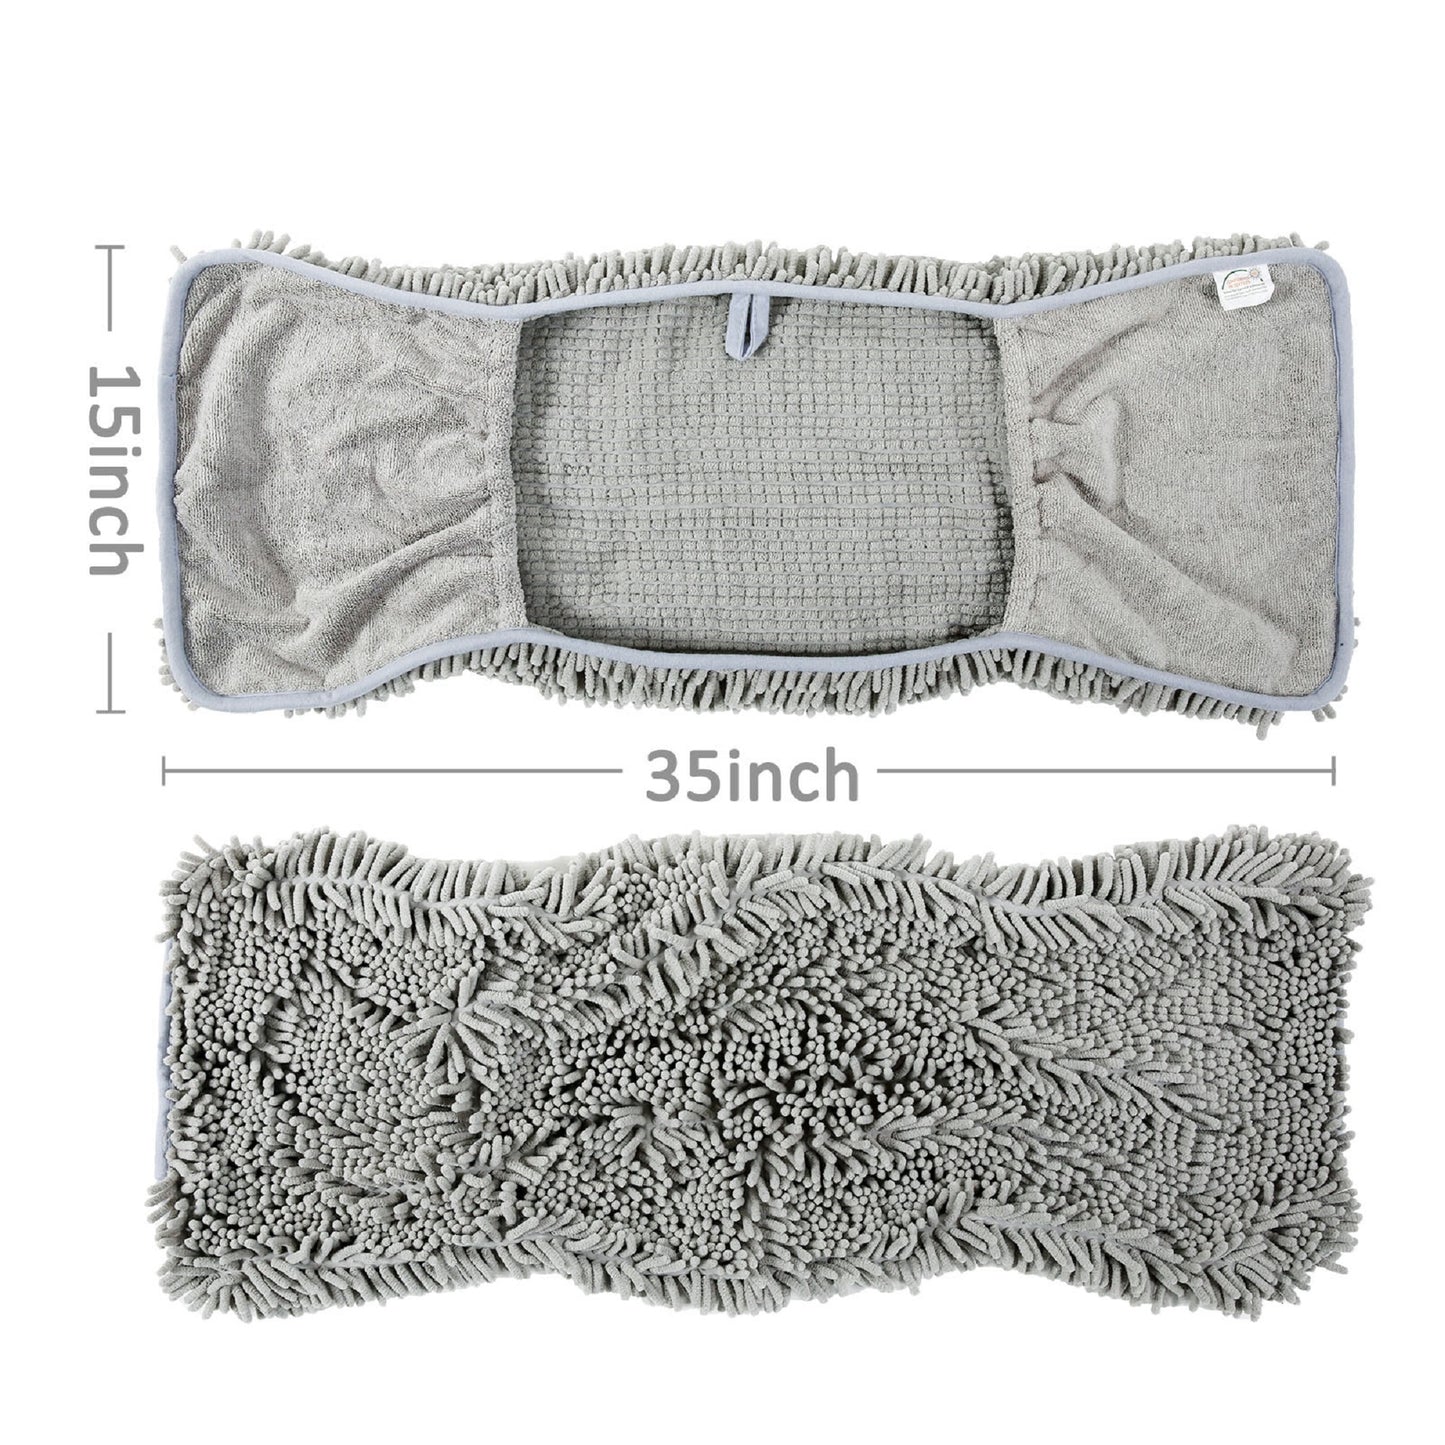 2 Pack Luxury Absorbent Dog Towels, (35"x15") Extra Large Microfiber Quick Drying Dog Shammy with Hand Pockets Pet Towel for Dog and Cat, Machine Washable (Grey+Grey)